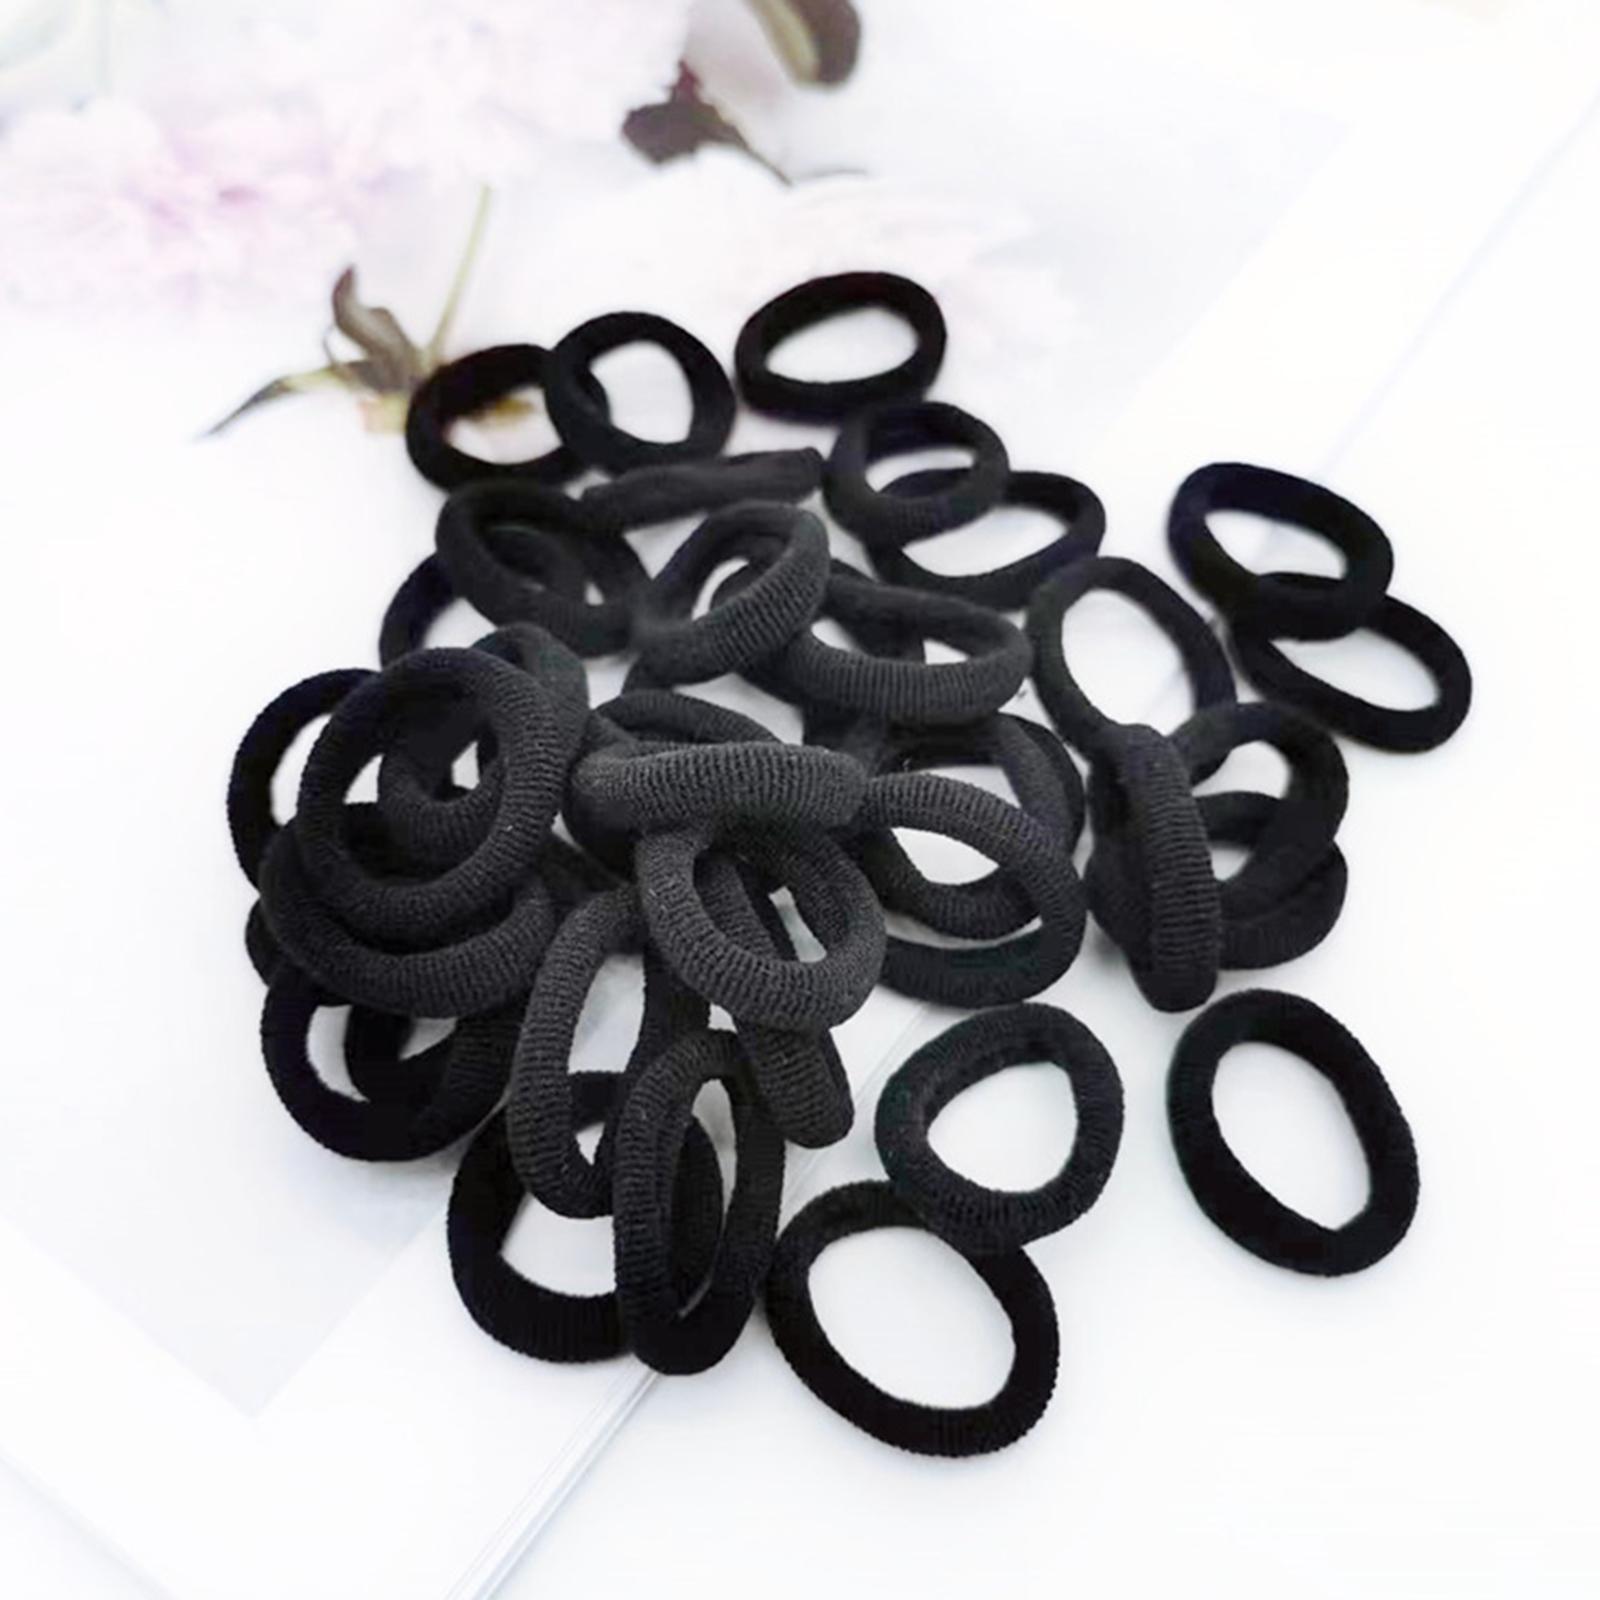 100 Pieces Black Hair Ties Hair Bands Thick Hair Accessories Small No Damage Soft Hair Ropes Stretch for Women Girls Elastic Cloth 0.9 inch